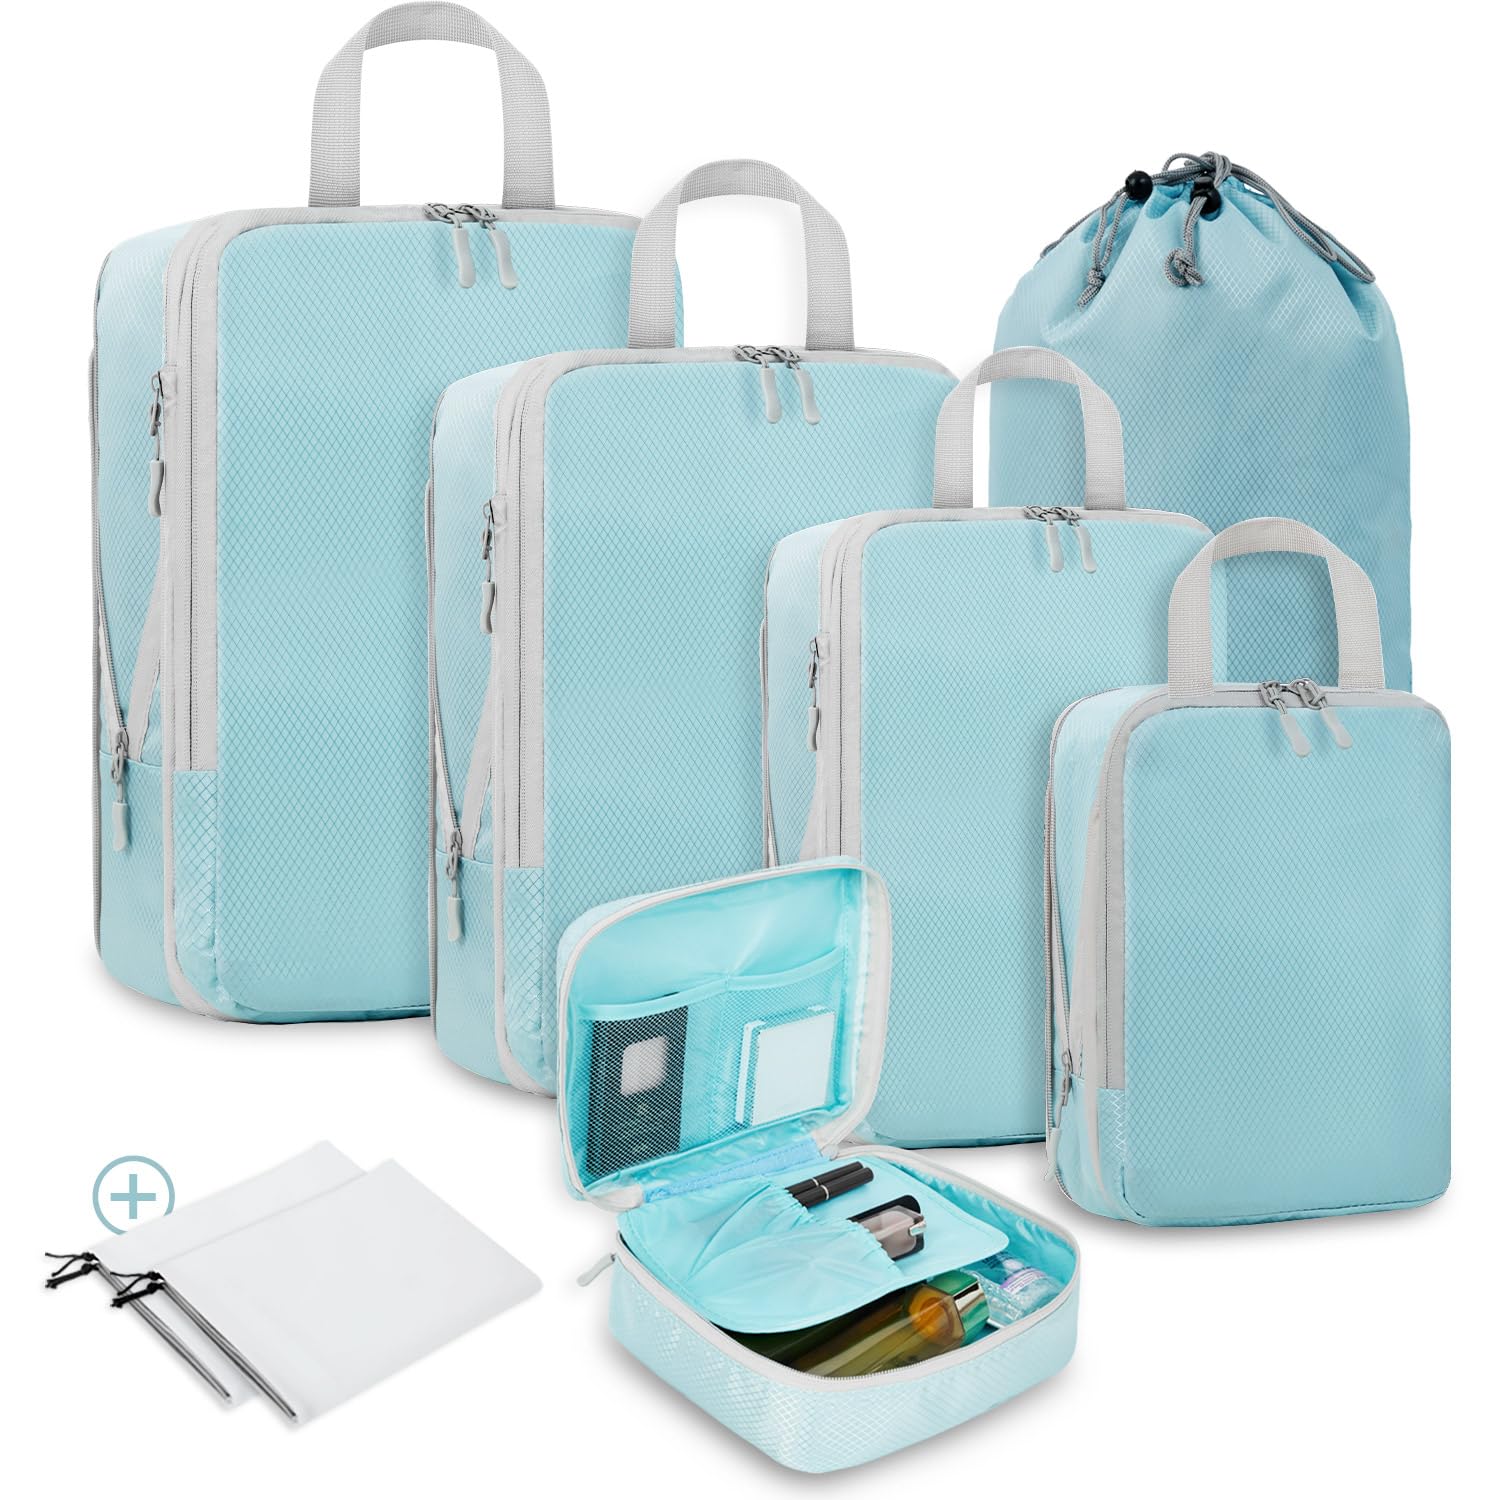 WellPromotion Best Luggage Organizers